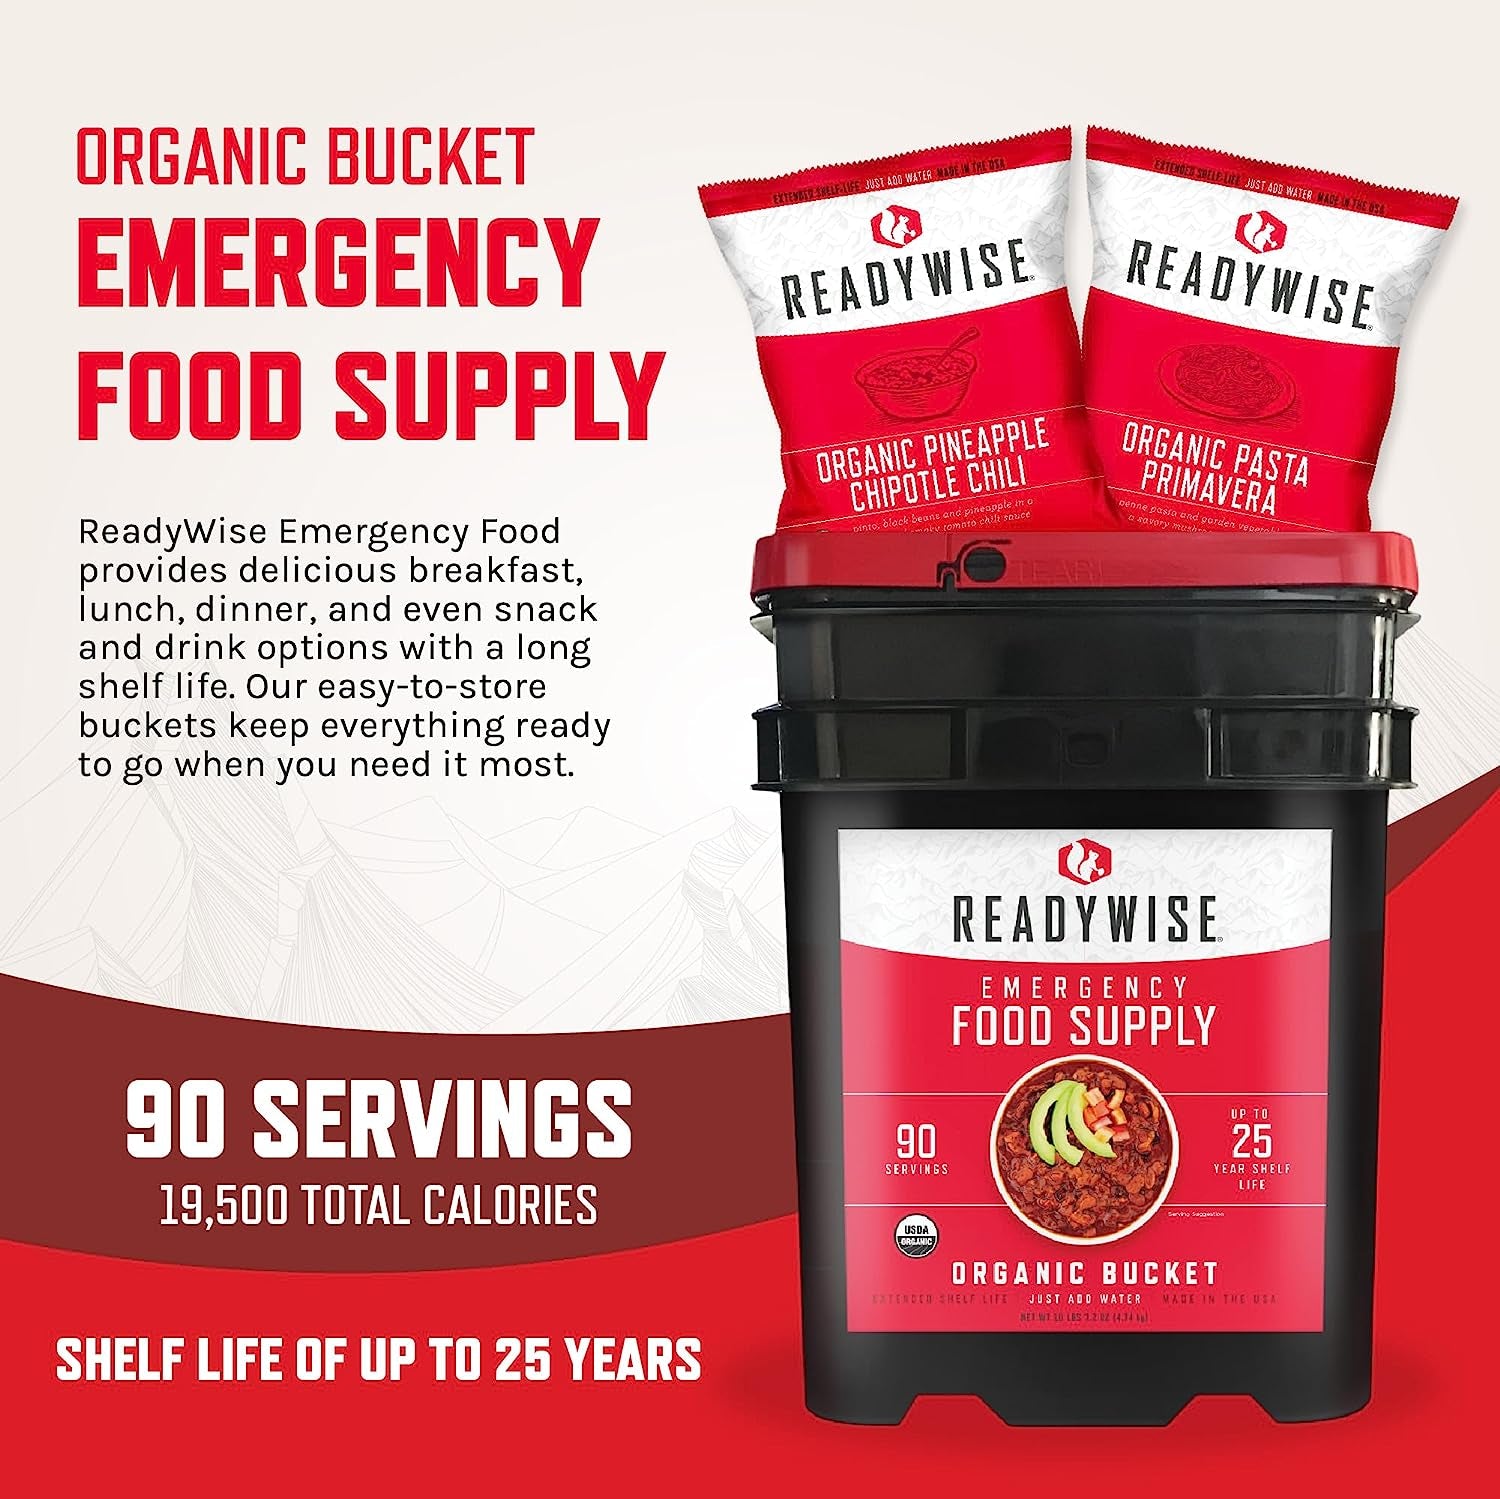 READYWISE Emergency, MRE Meal, Food Supply, Premade, Freeze Dried Survival Food for Hiking, Adventure and Camping Essentials, Individually Packaged, 25 Year Shelf Life ORGANIC Bucket - 90 Servings